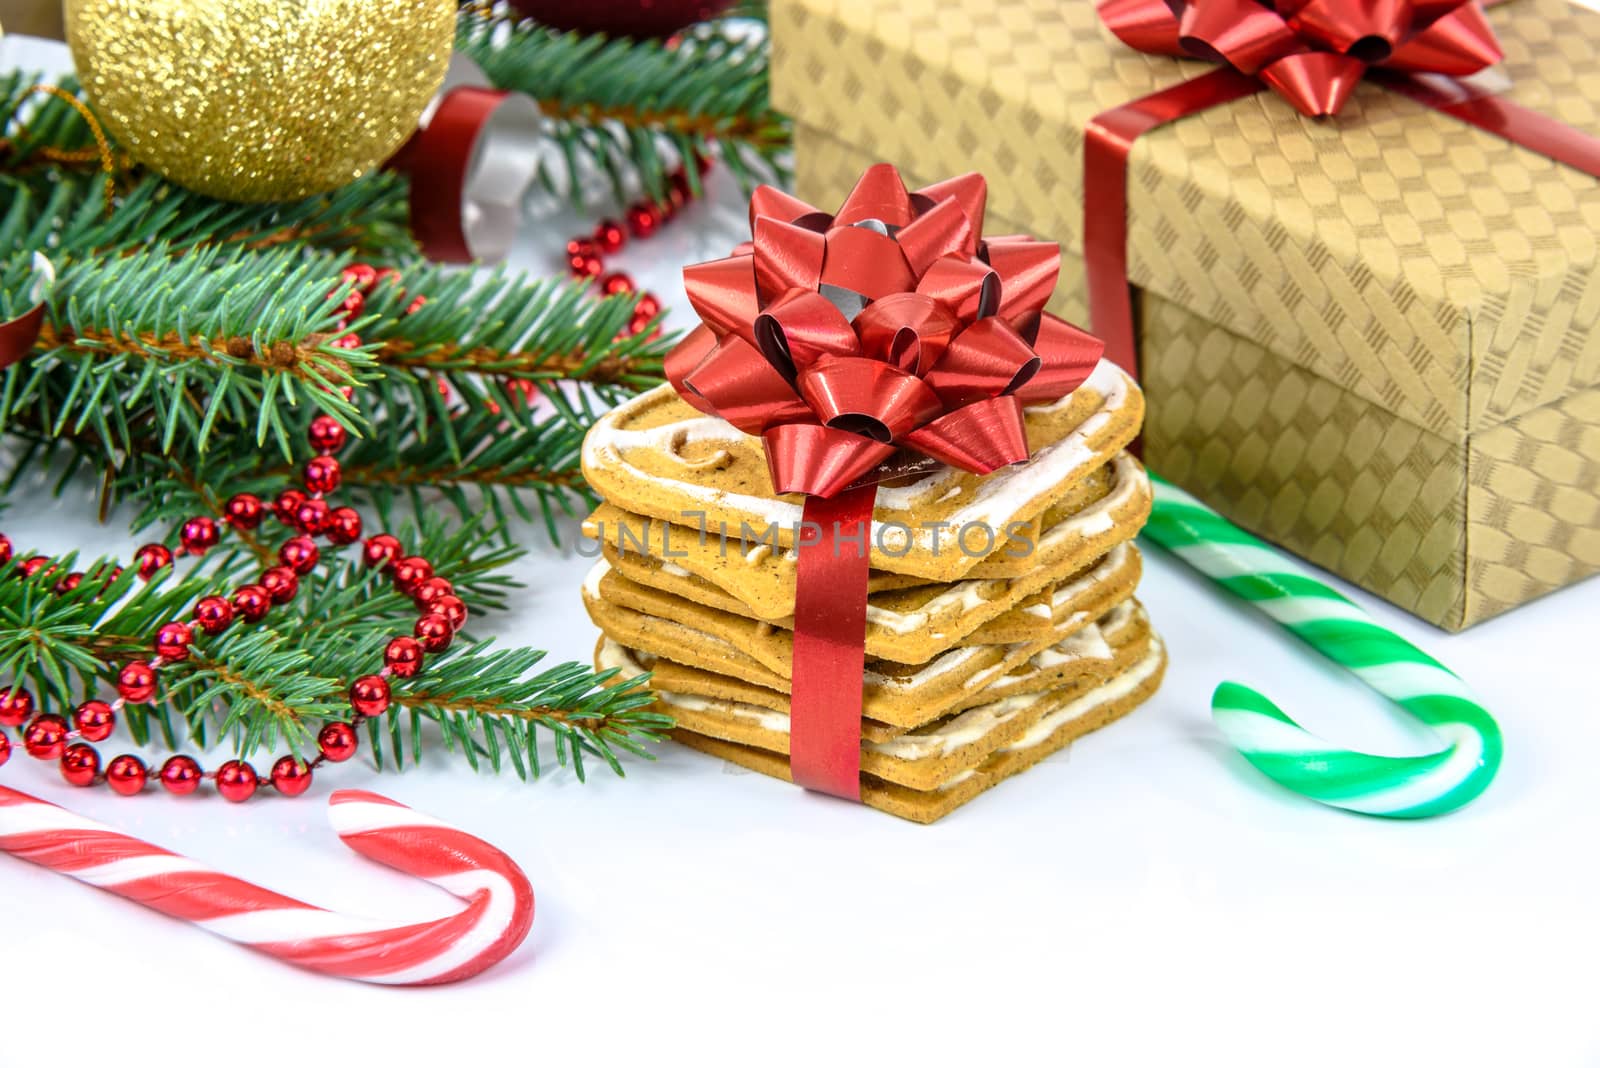 Christmas sweets and gifts by wdnet_studio